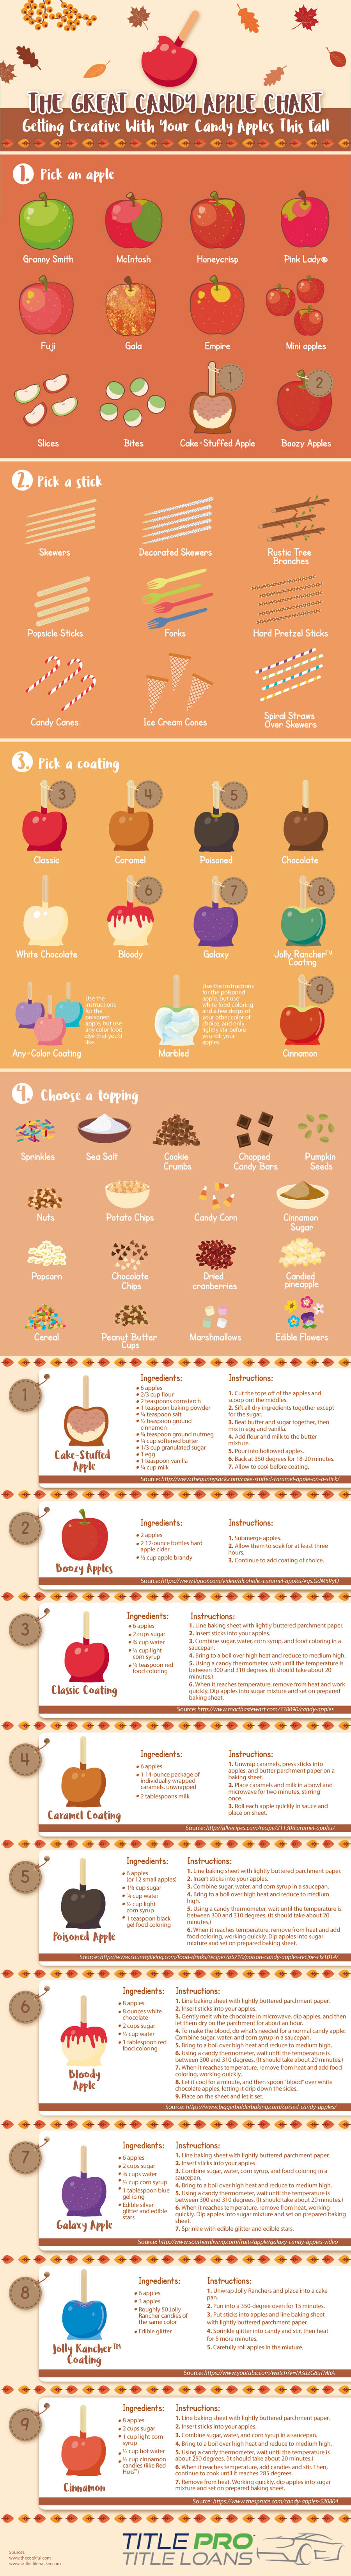 The Great Candy Apple Chart